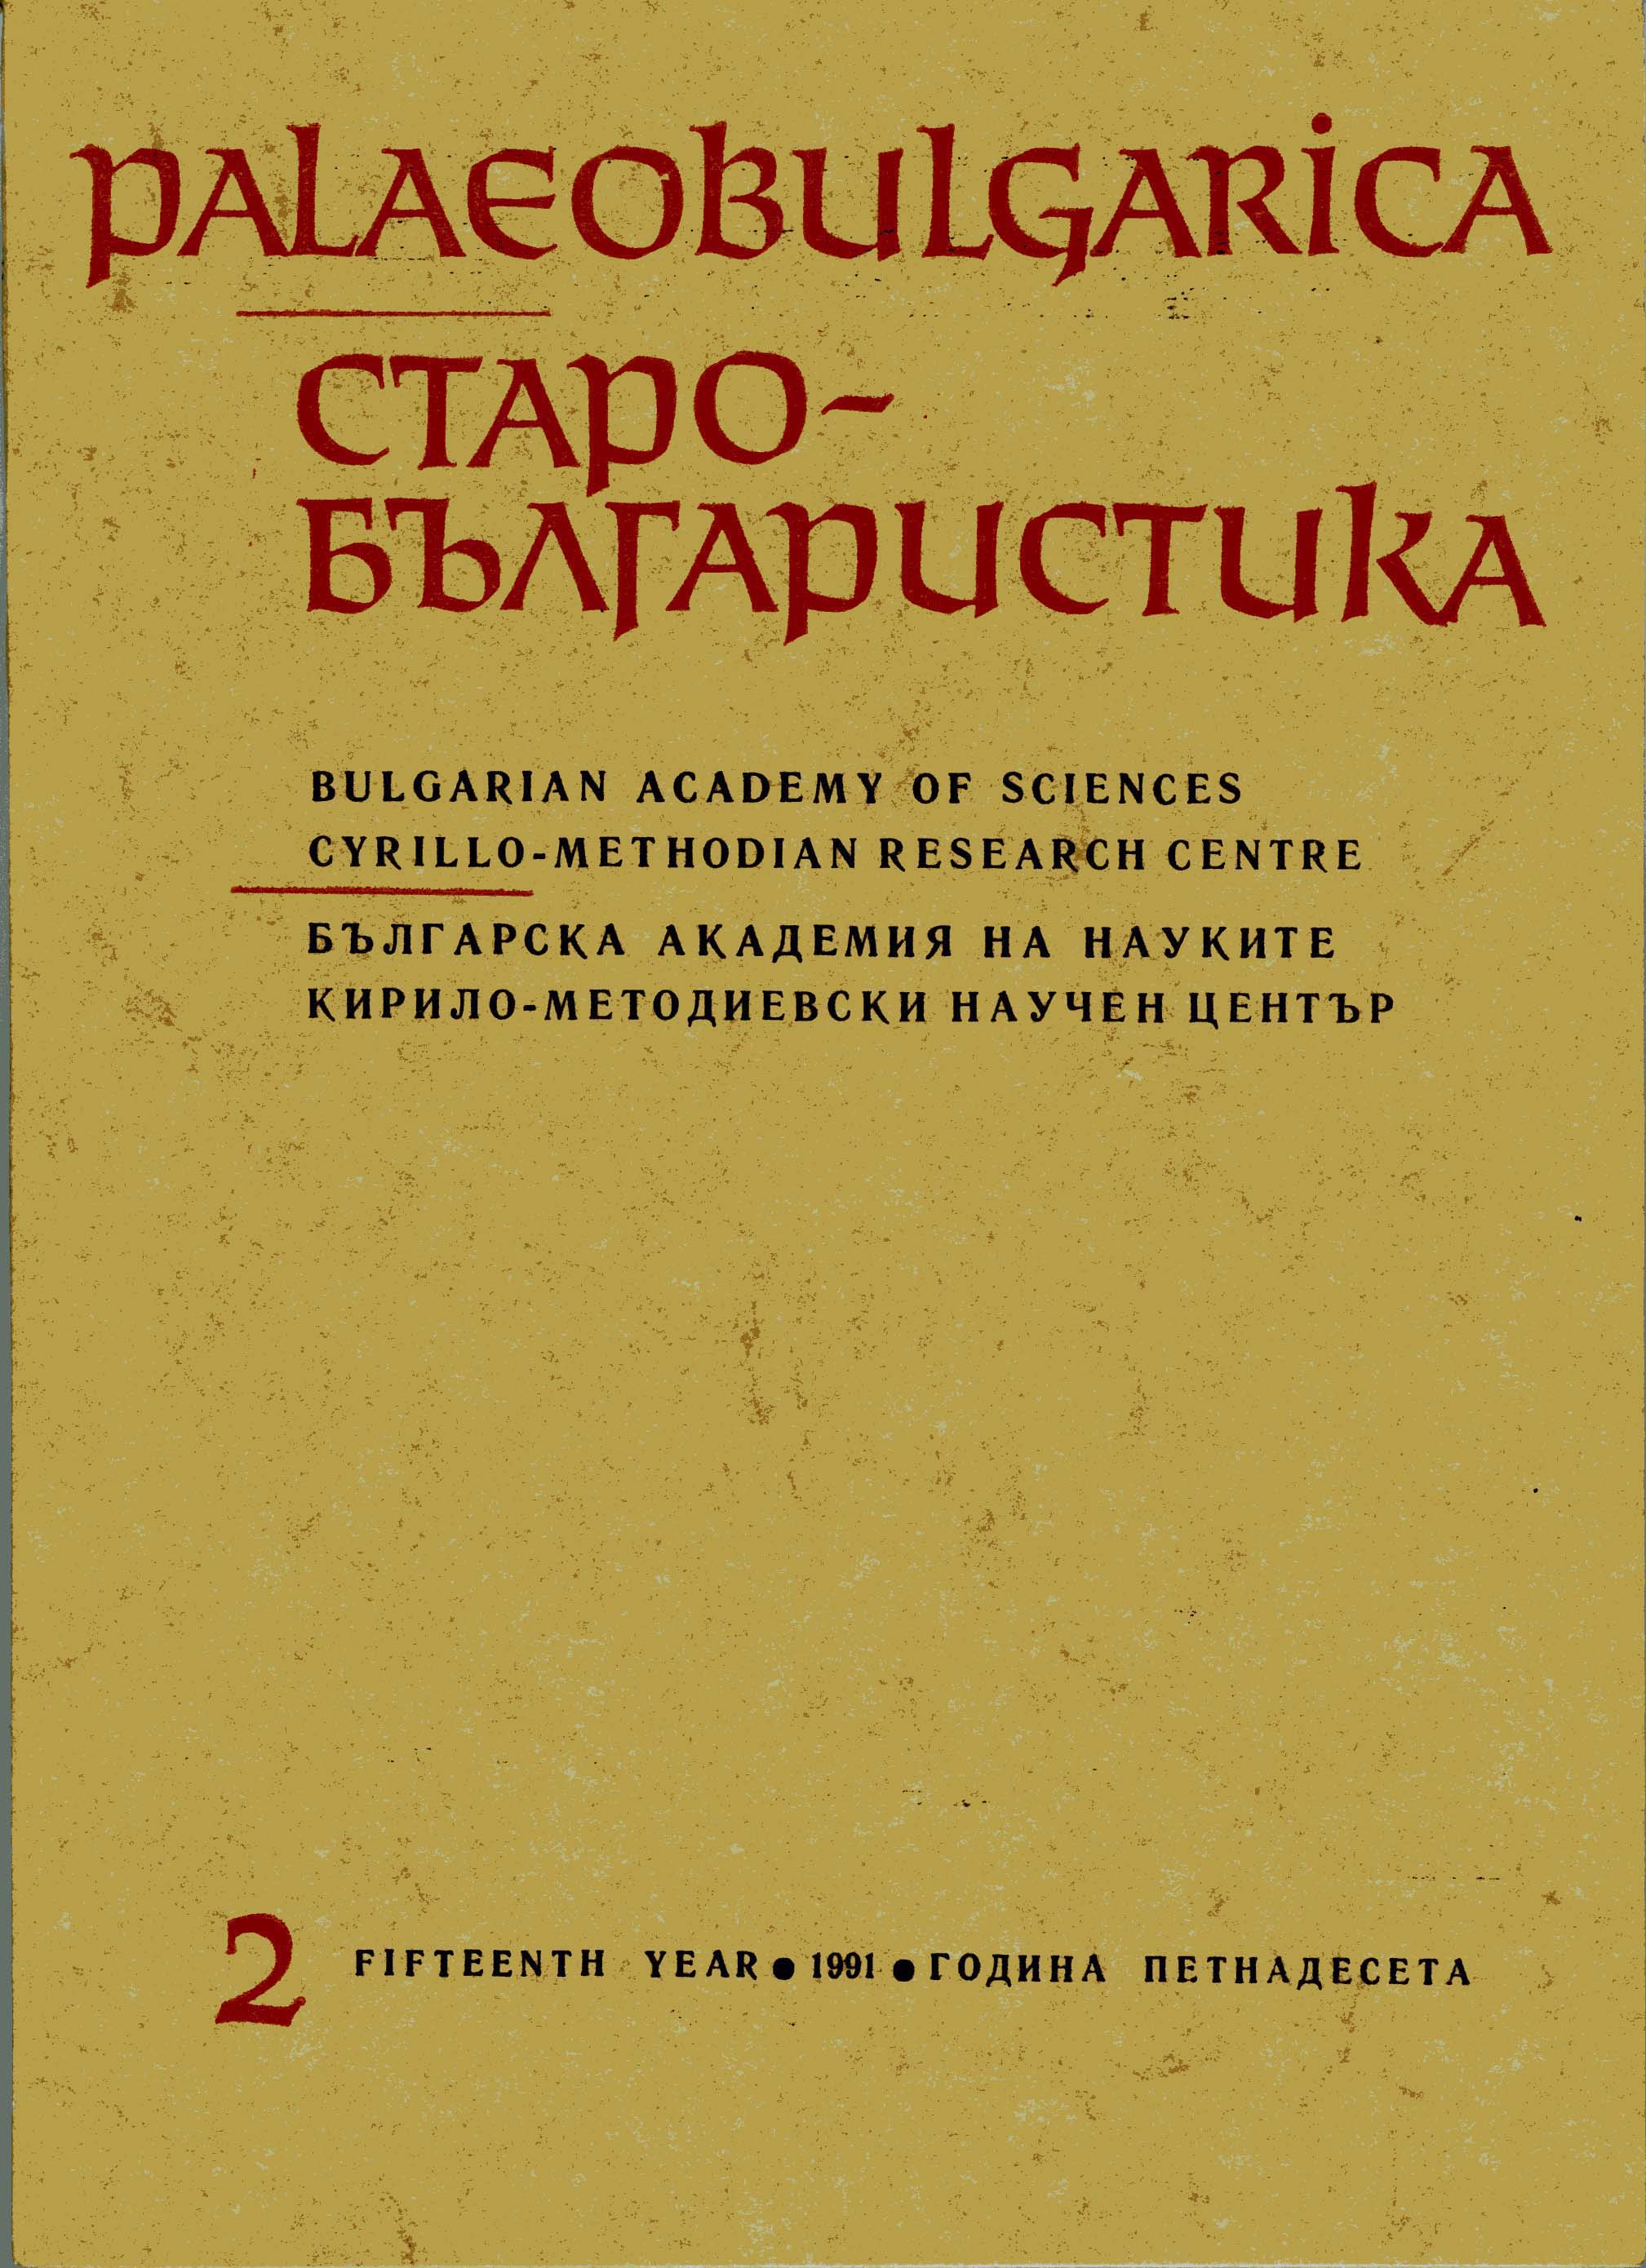 Overcorrection as a Symptom in the East Slavic Writing Cover Image